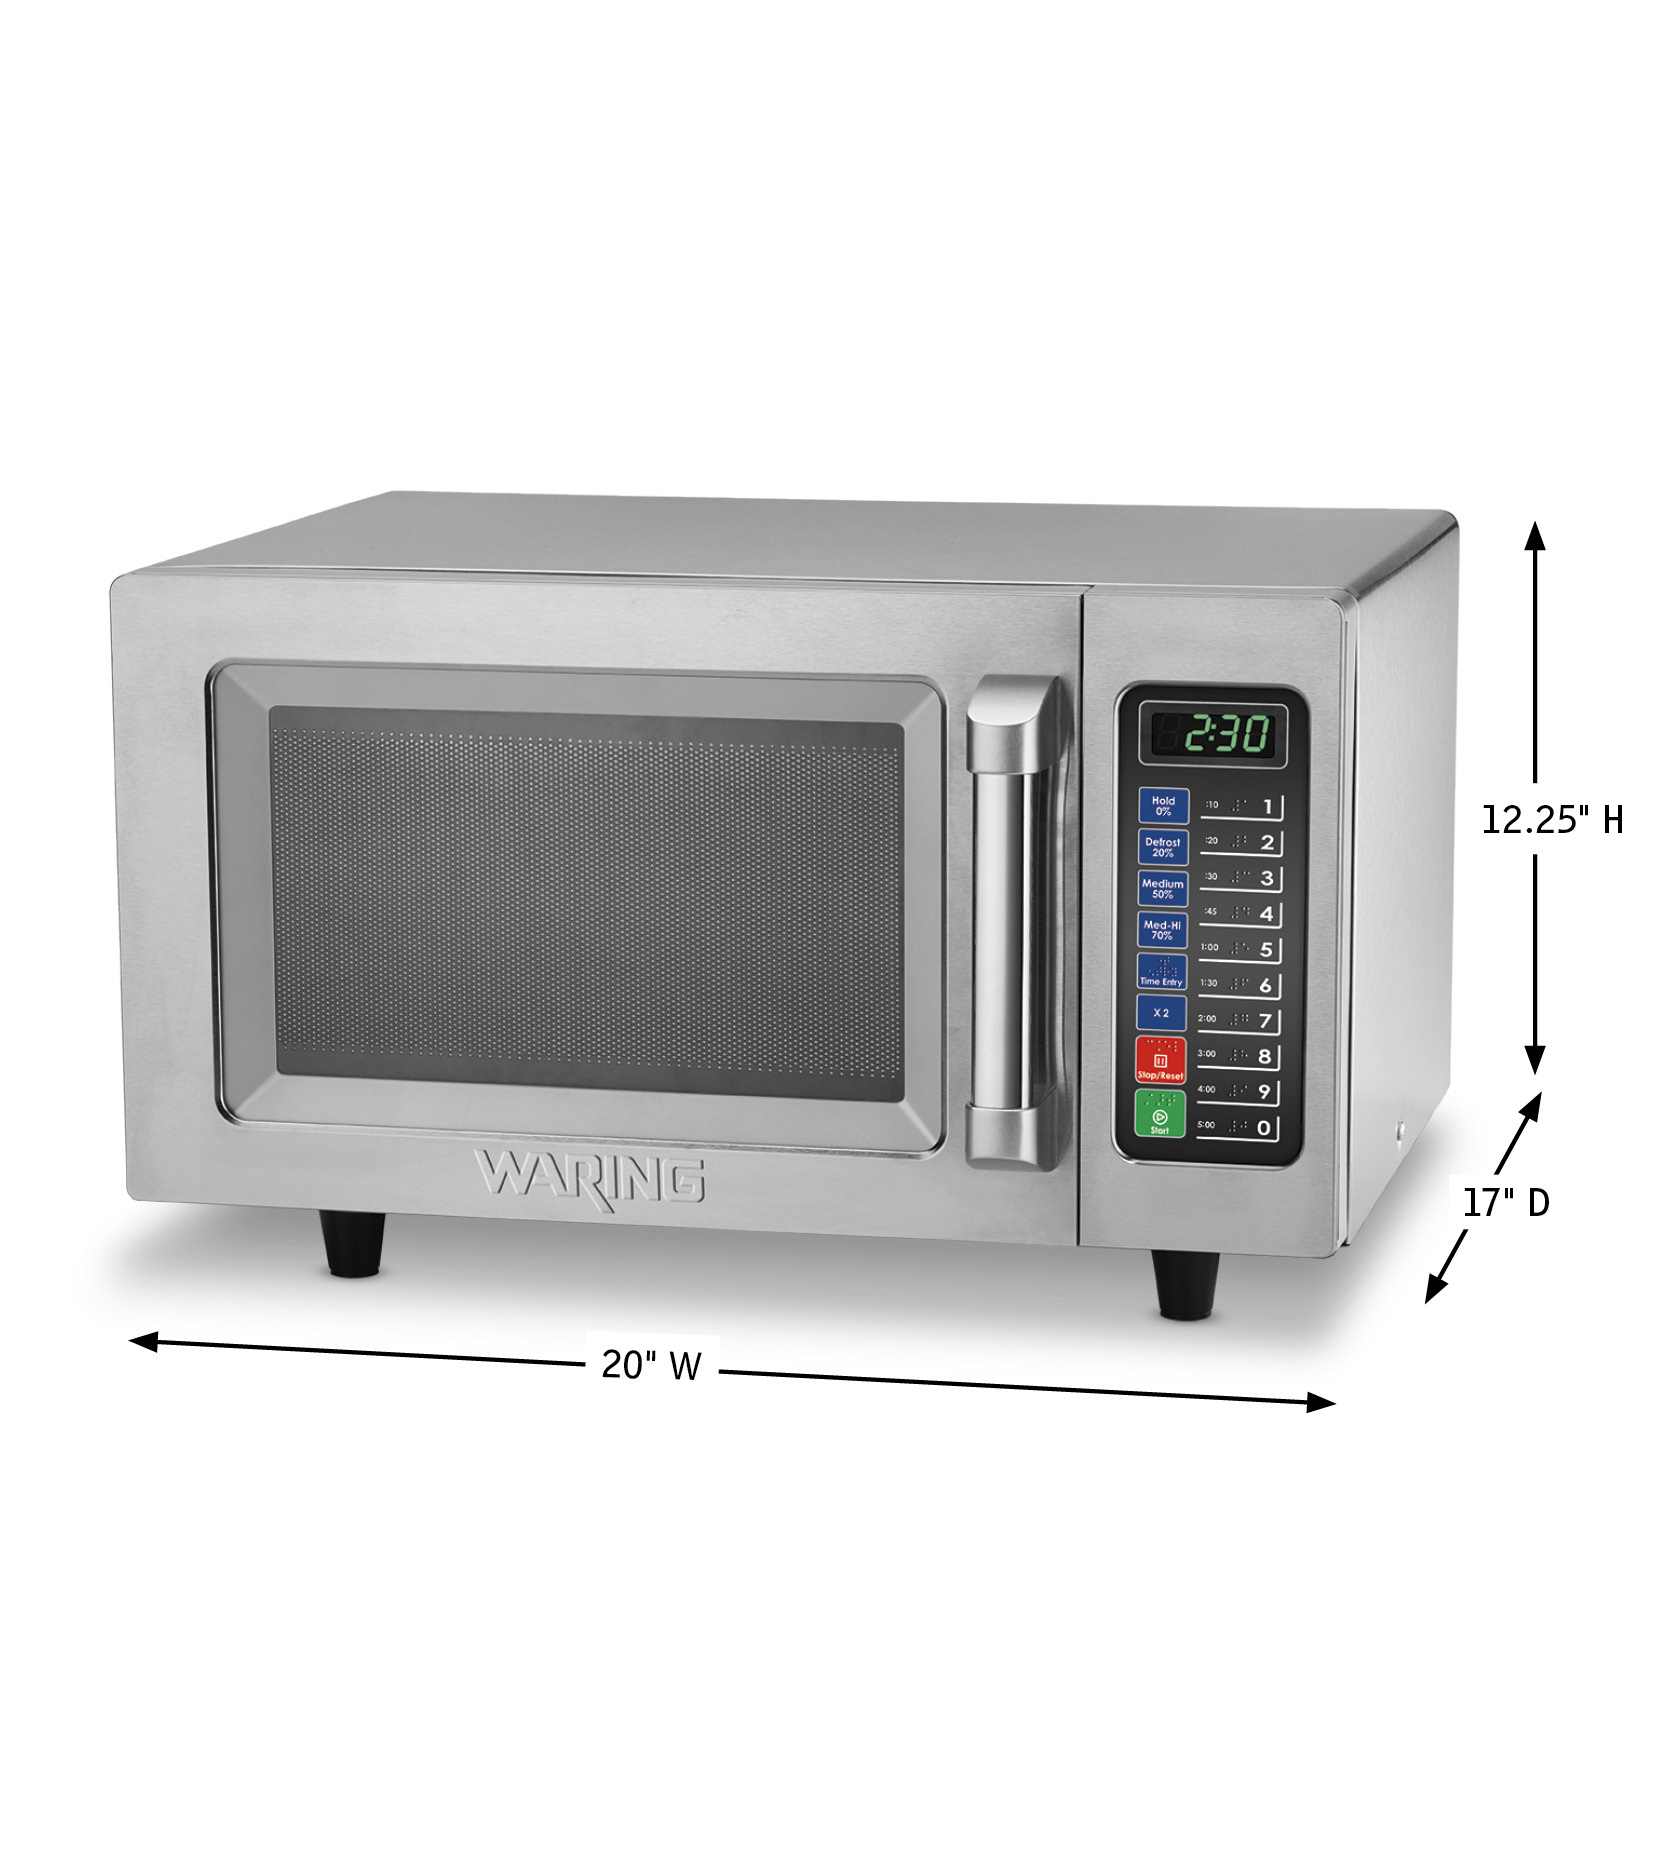 Waring Commercial Heavy-Duty 1.2 Cubic Feet Microwave Oven